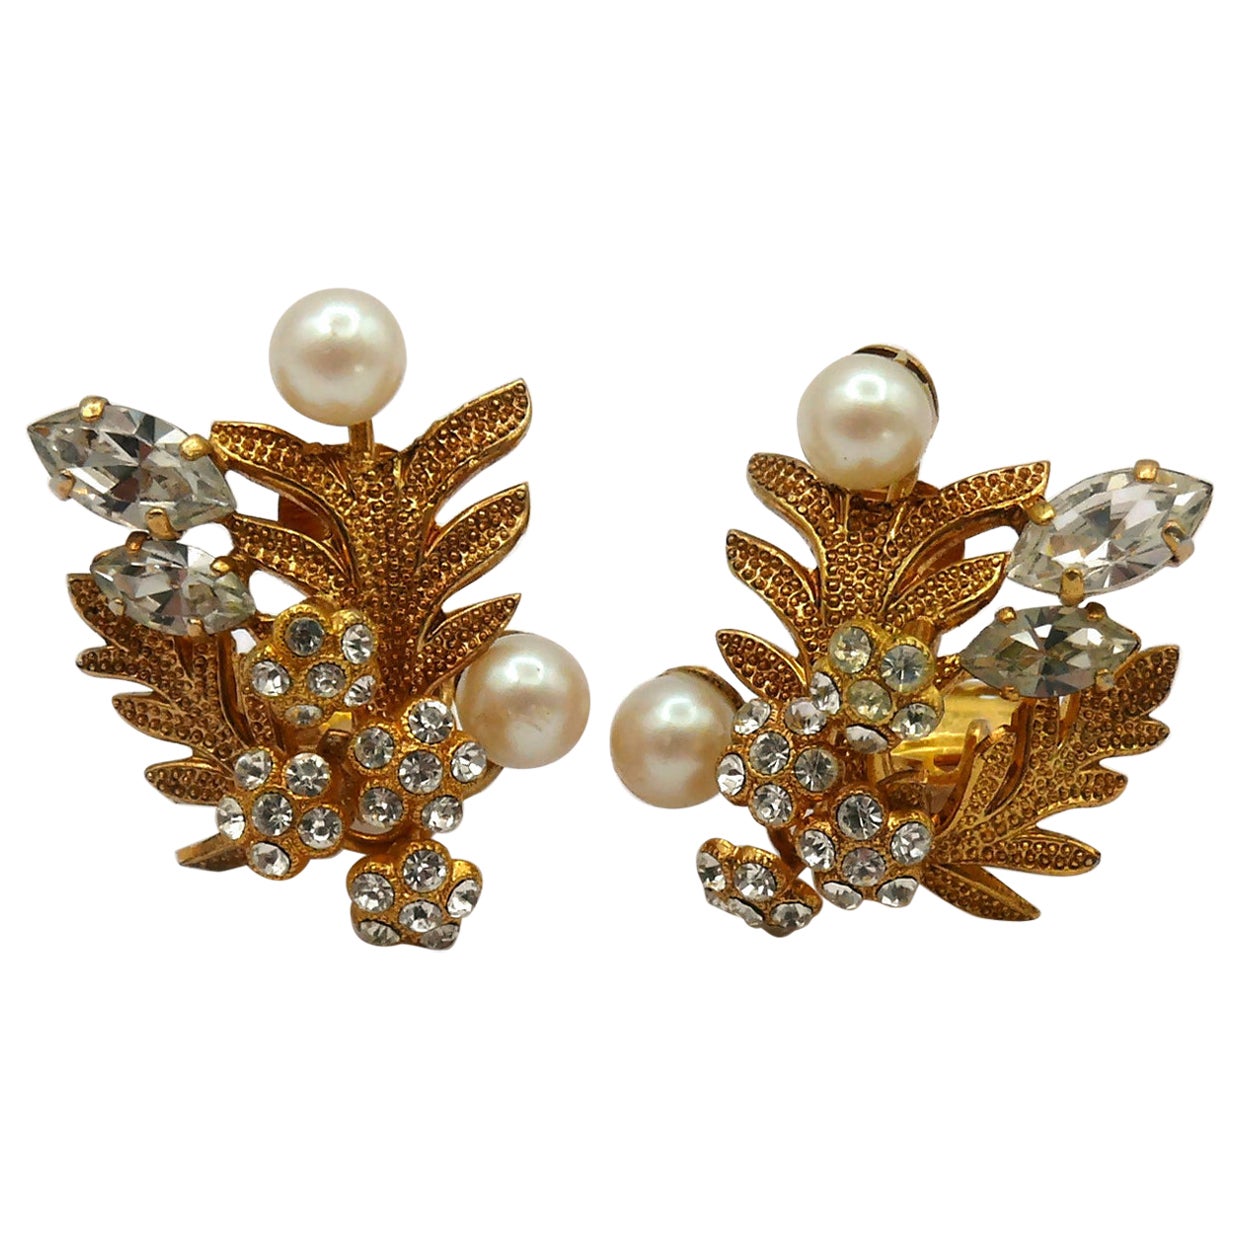 CHRISTIAN DIOR Vintage Jewelled Floral Clip-On Earrings, 1968 For Sale